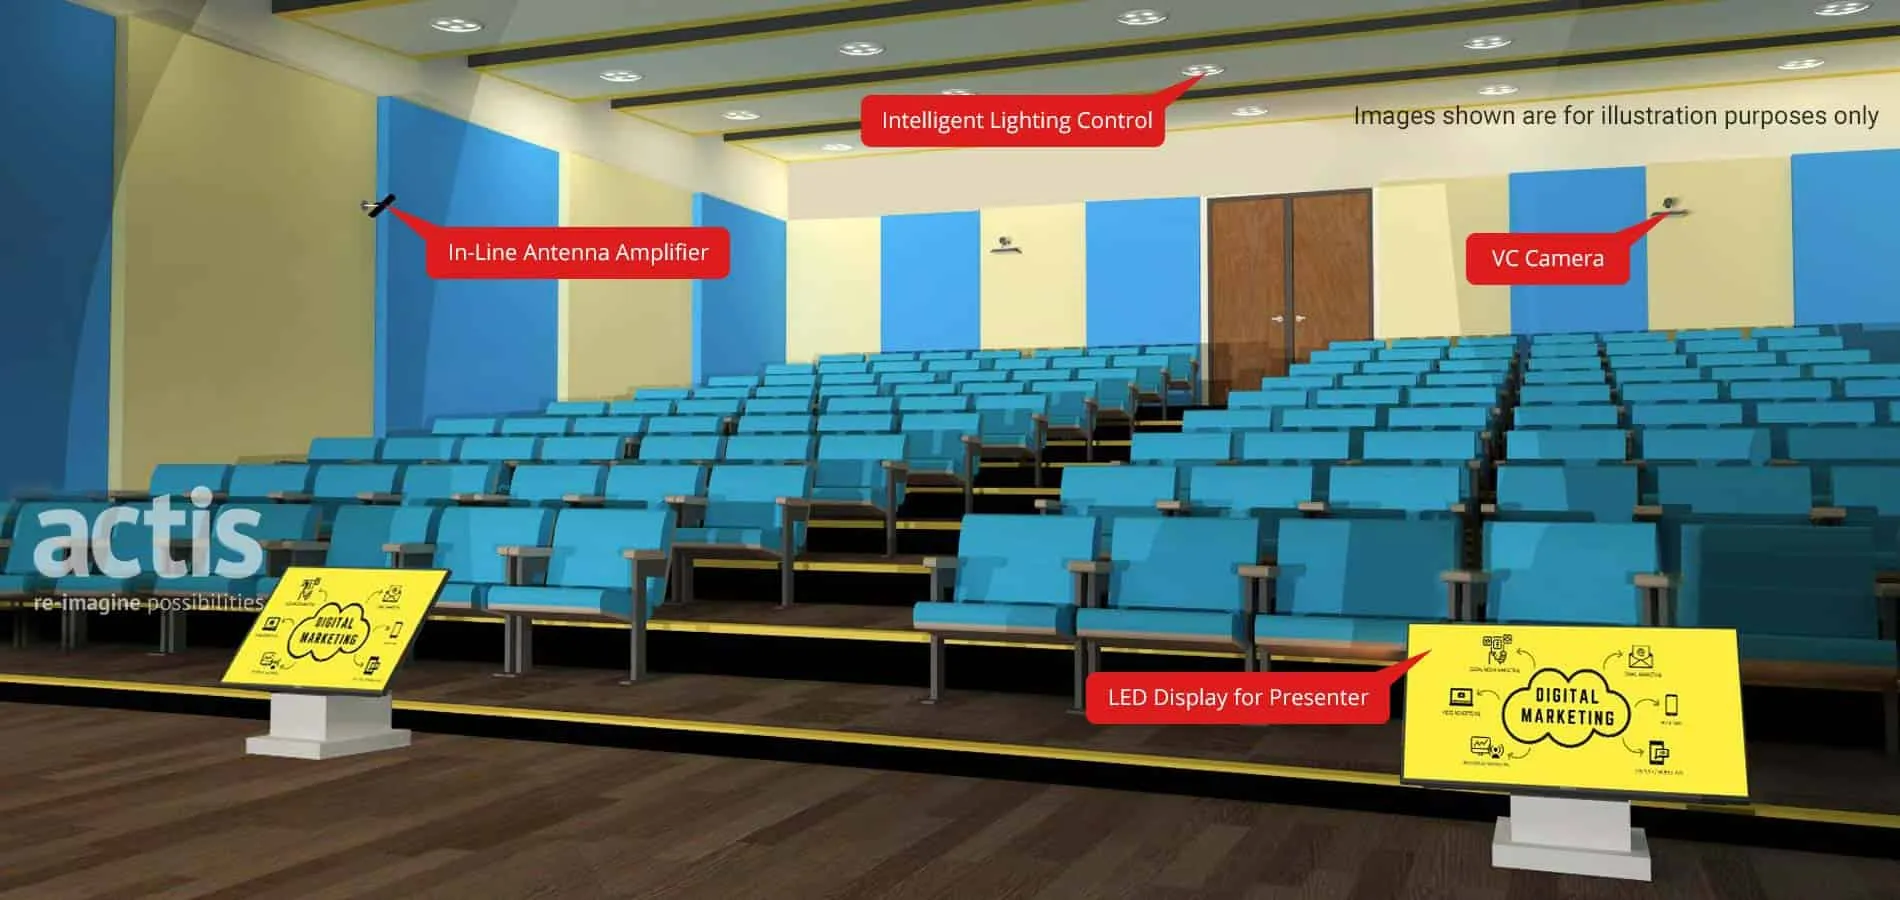 Auditorium: Multiple 30x zoom cameras allow VC, recording and live streaming